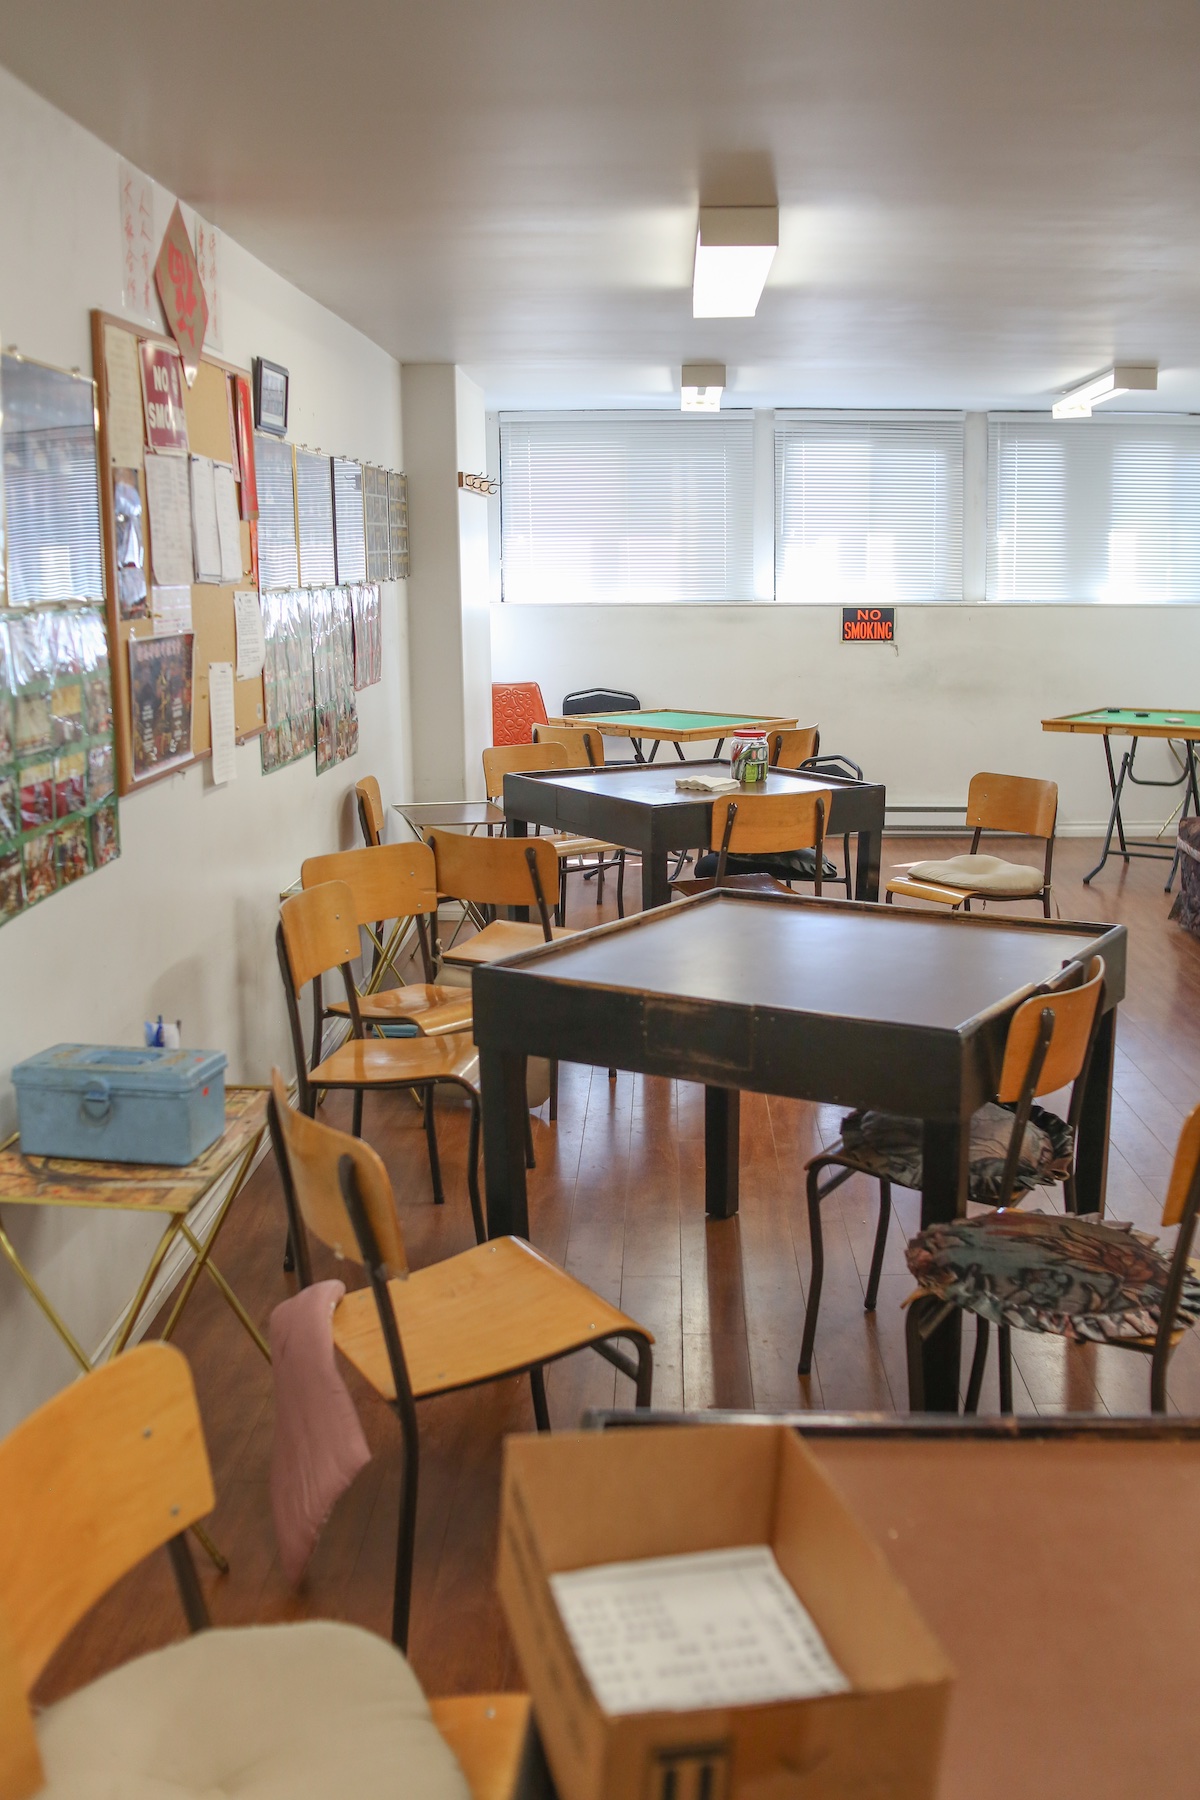 A brightly lit indoor space features several wooden classroom-style chairs and a square table used for playing mah-jong.